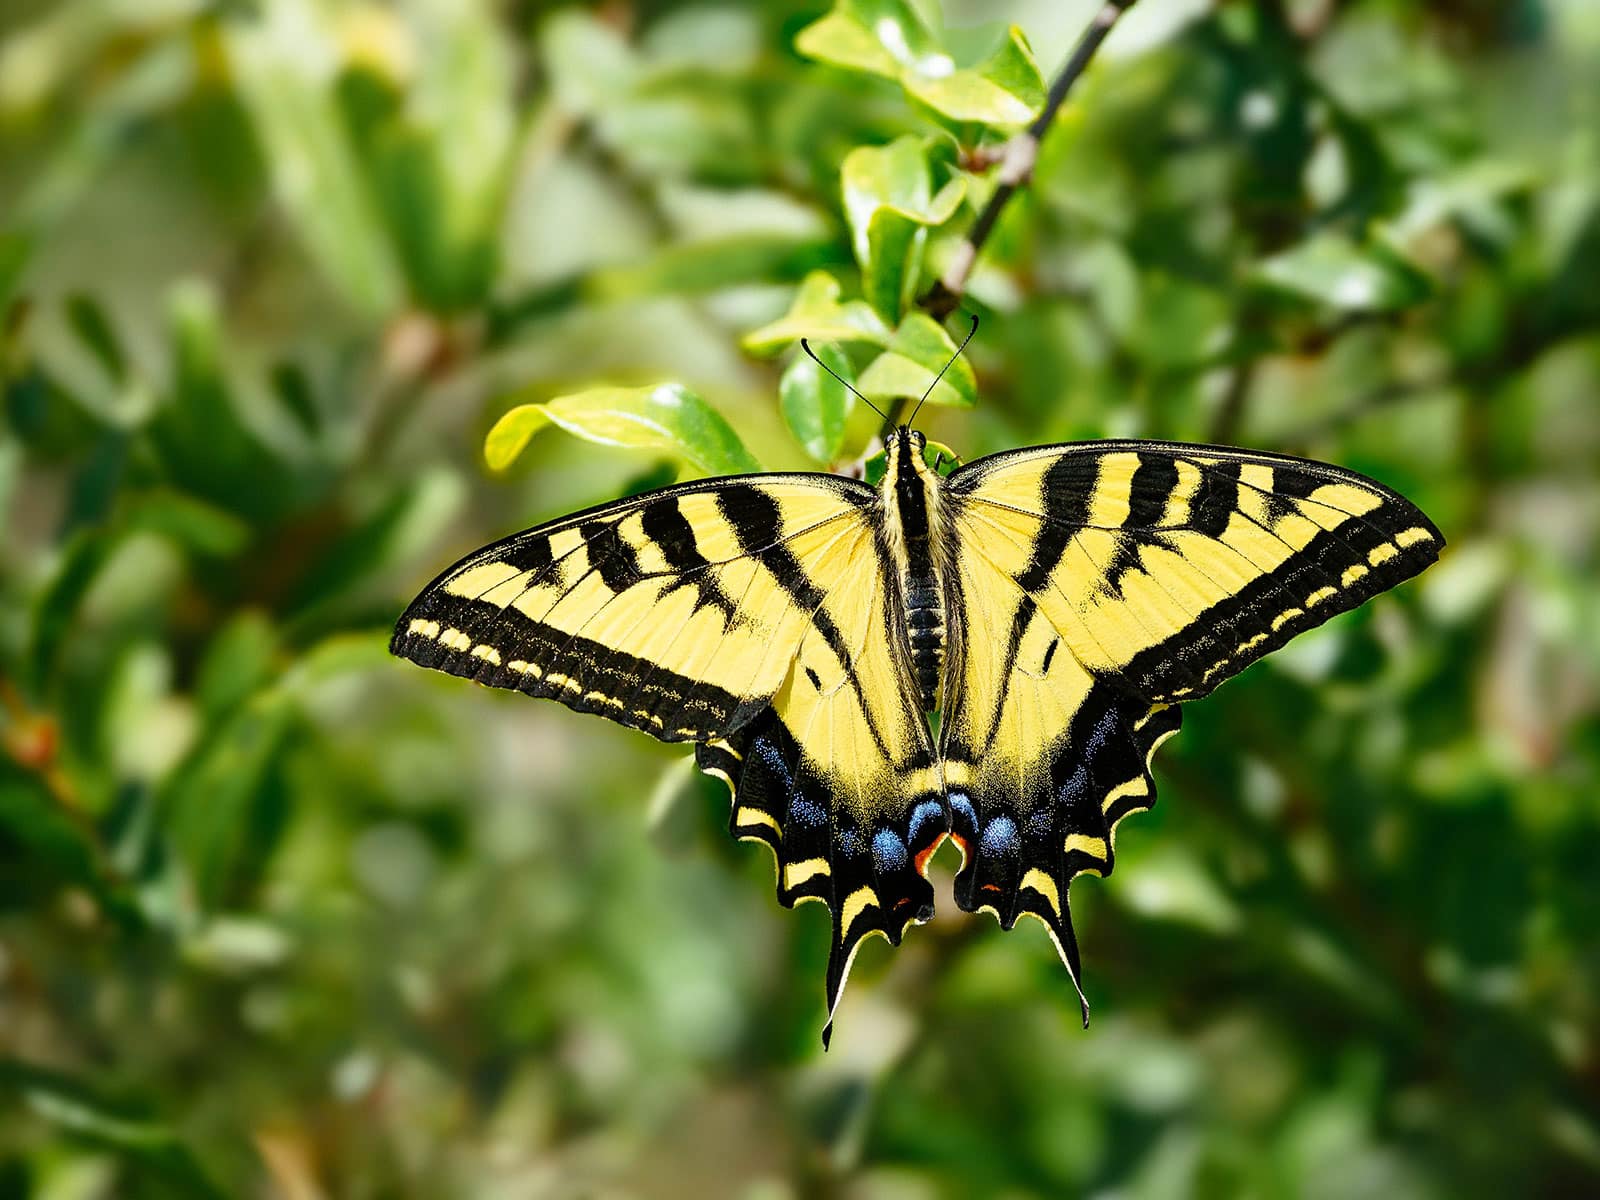 Western tiger swallowtail on a tree branch